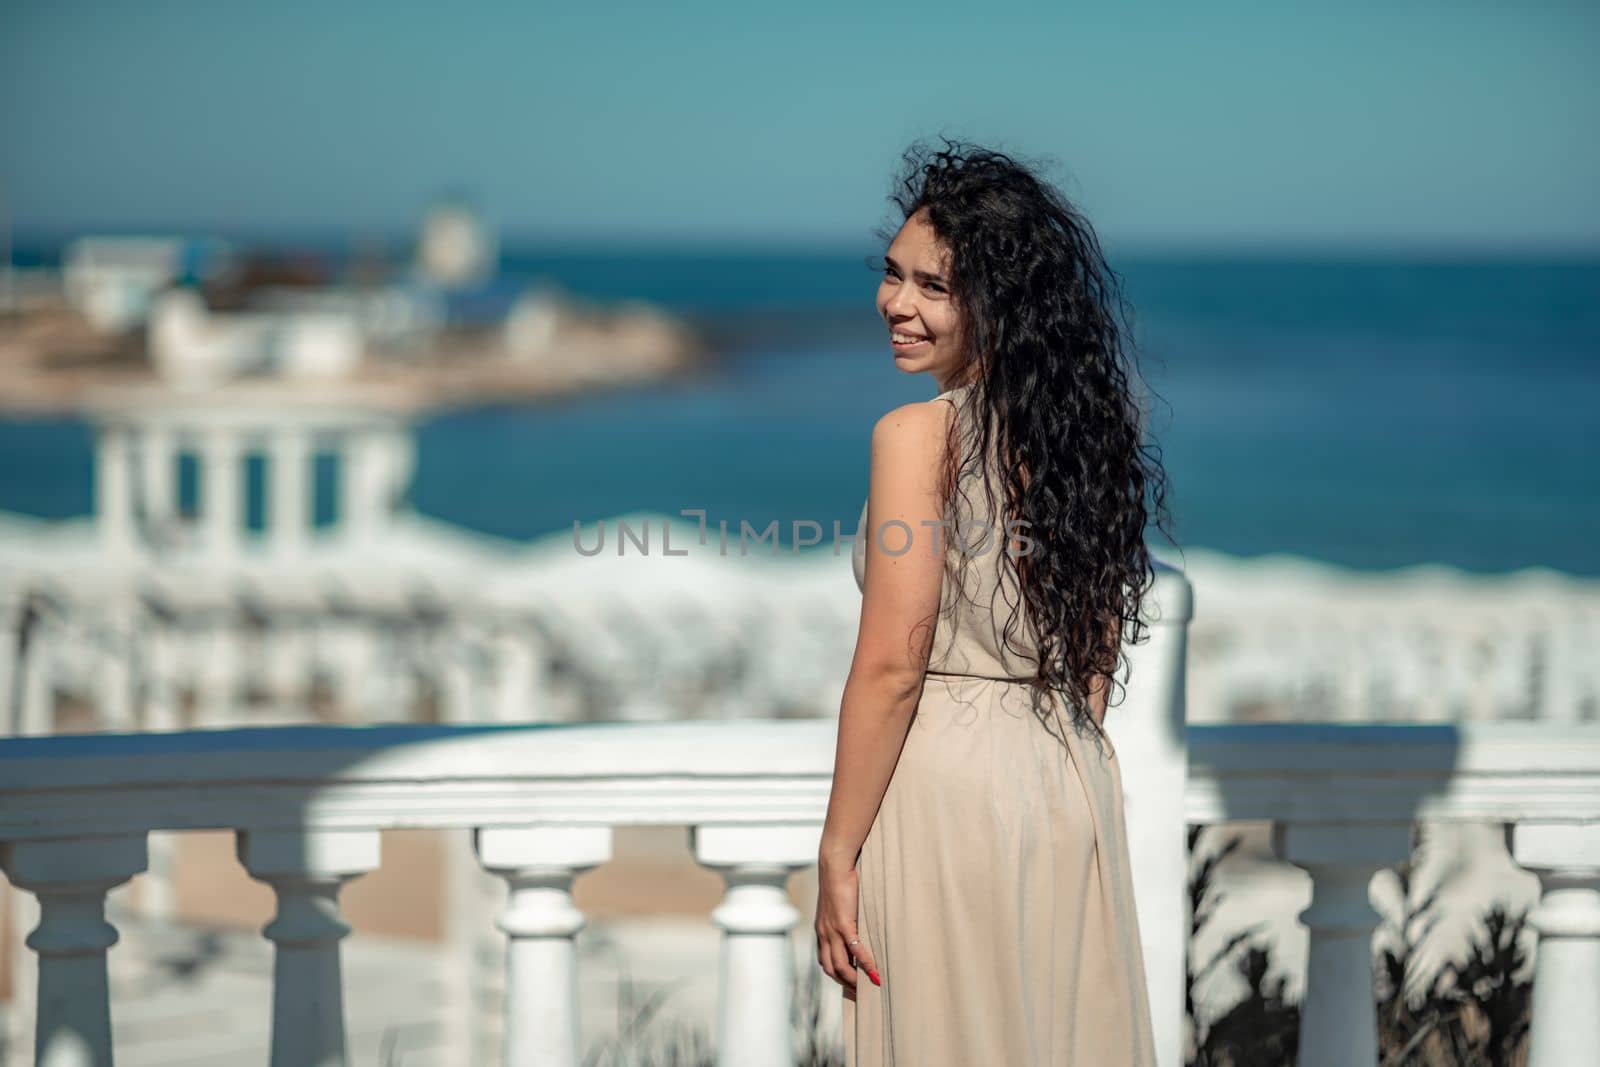 Sea woman rest. A woman with long curly hair in a beige dress stands with her back and looks at the sea and the coast from a balcony with balusters. Tourist trip to the sea